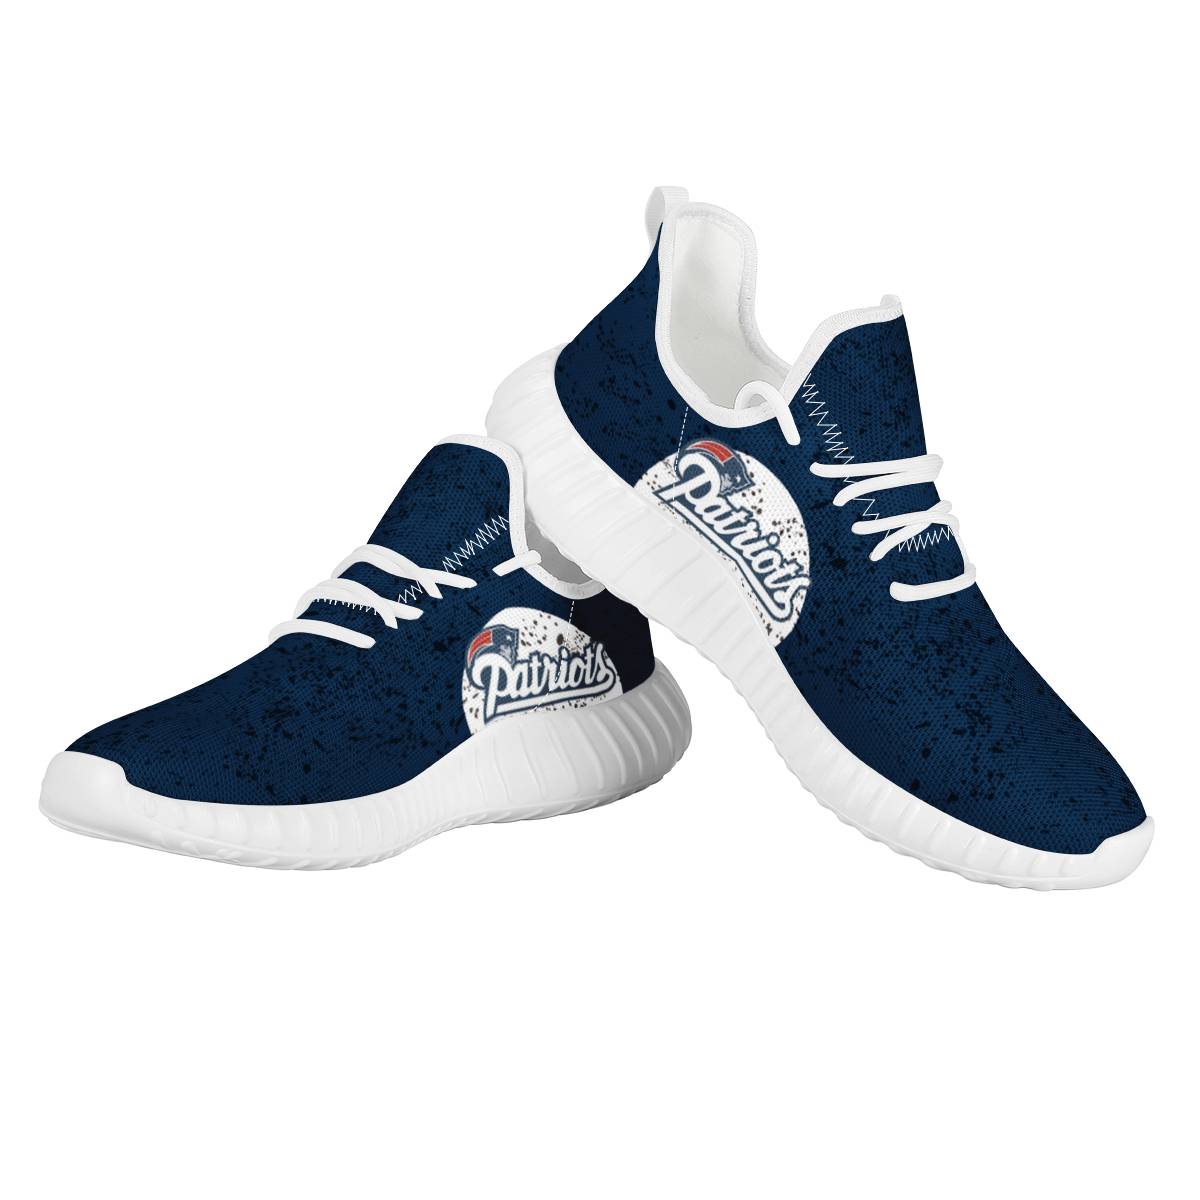 Women's New England Patriots Mesh Knit Sneakers/Shoes 018